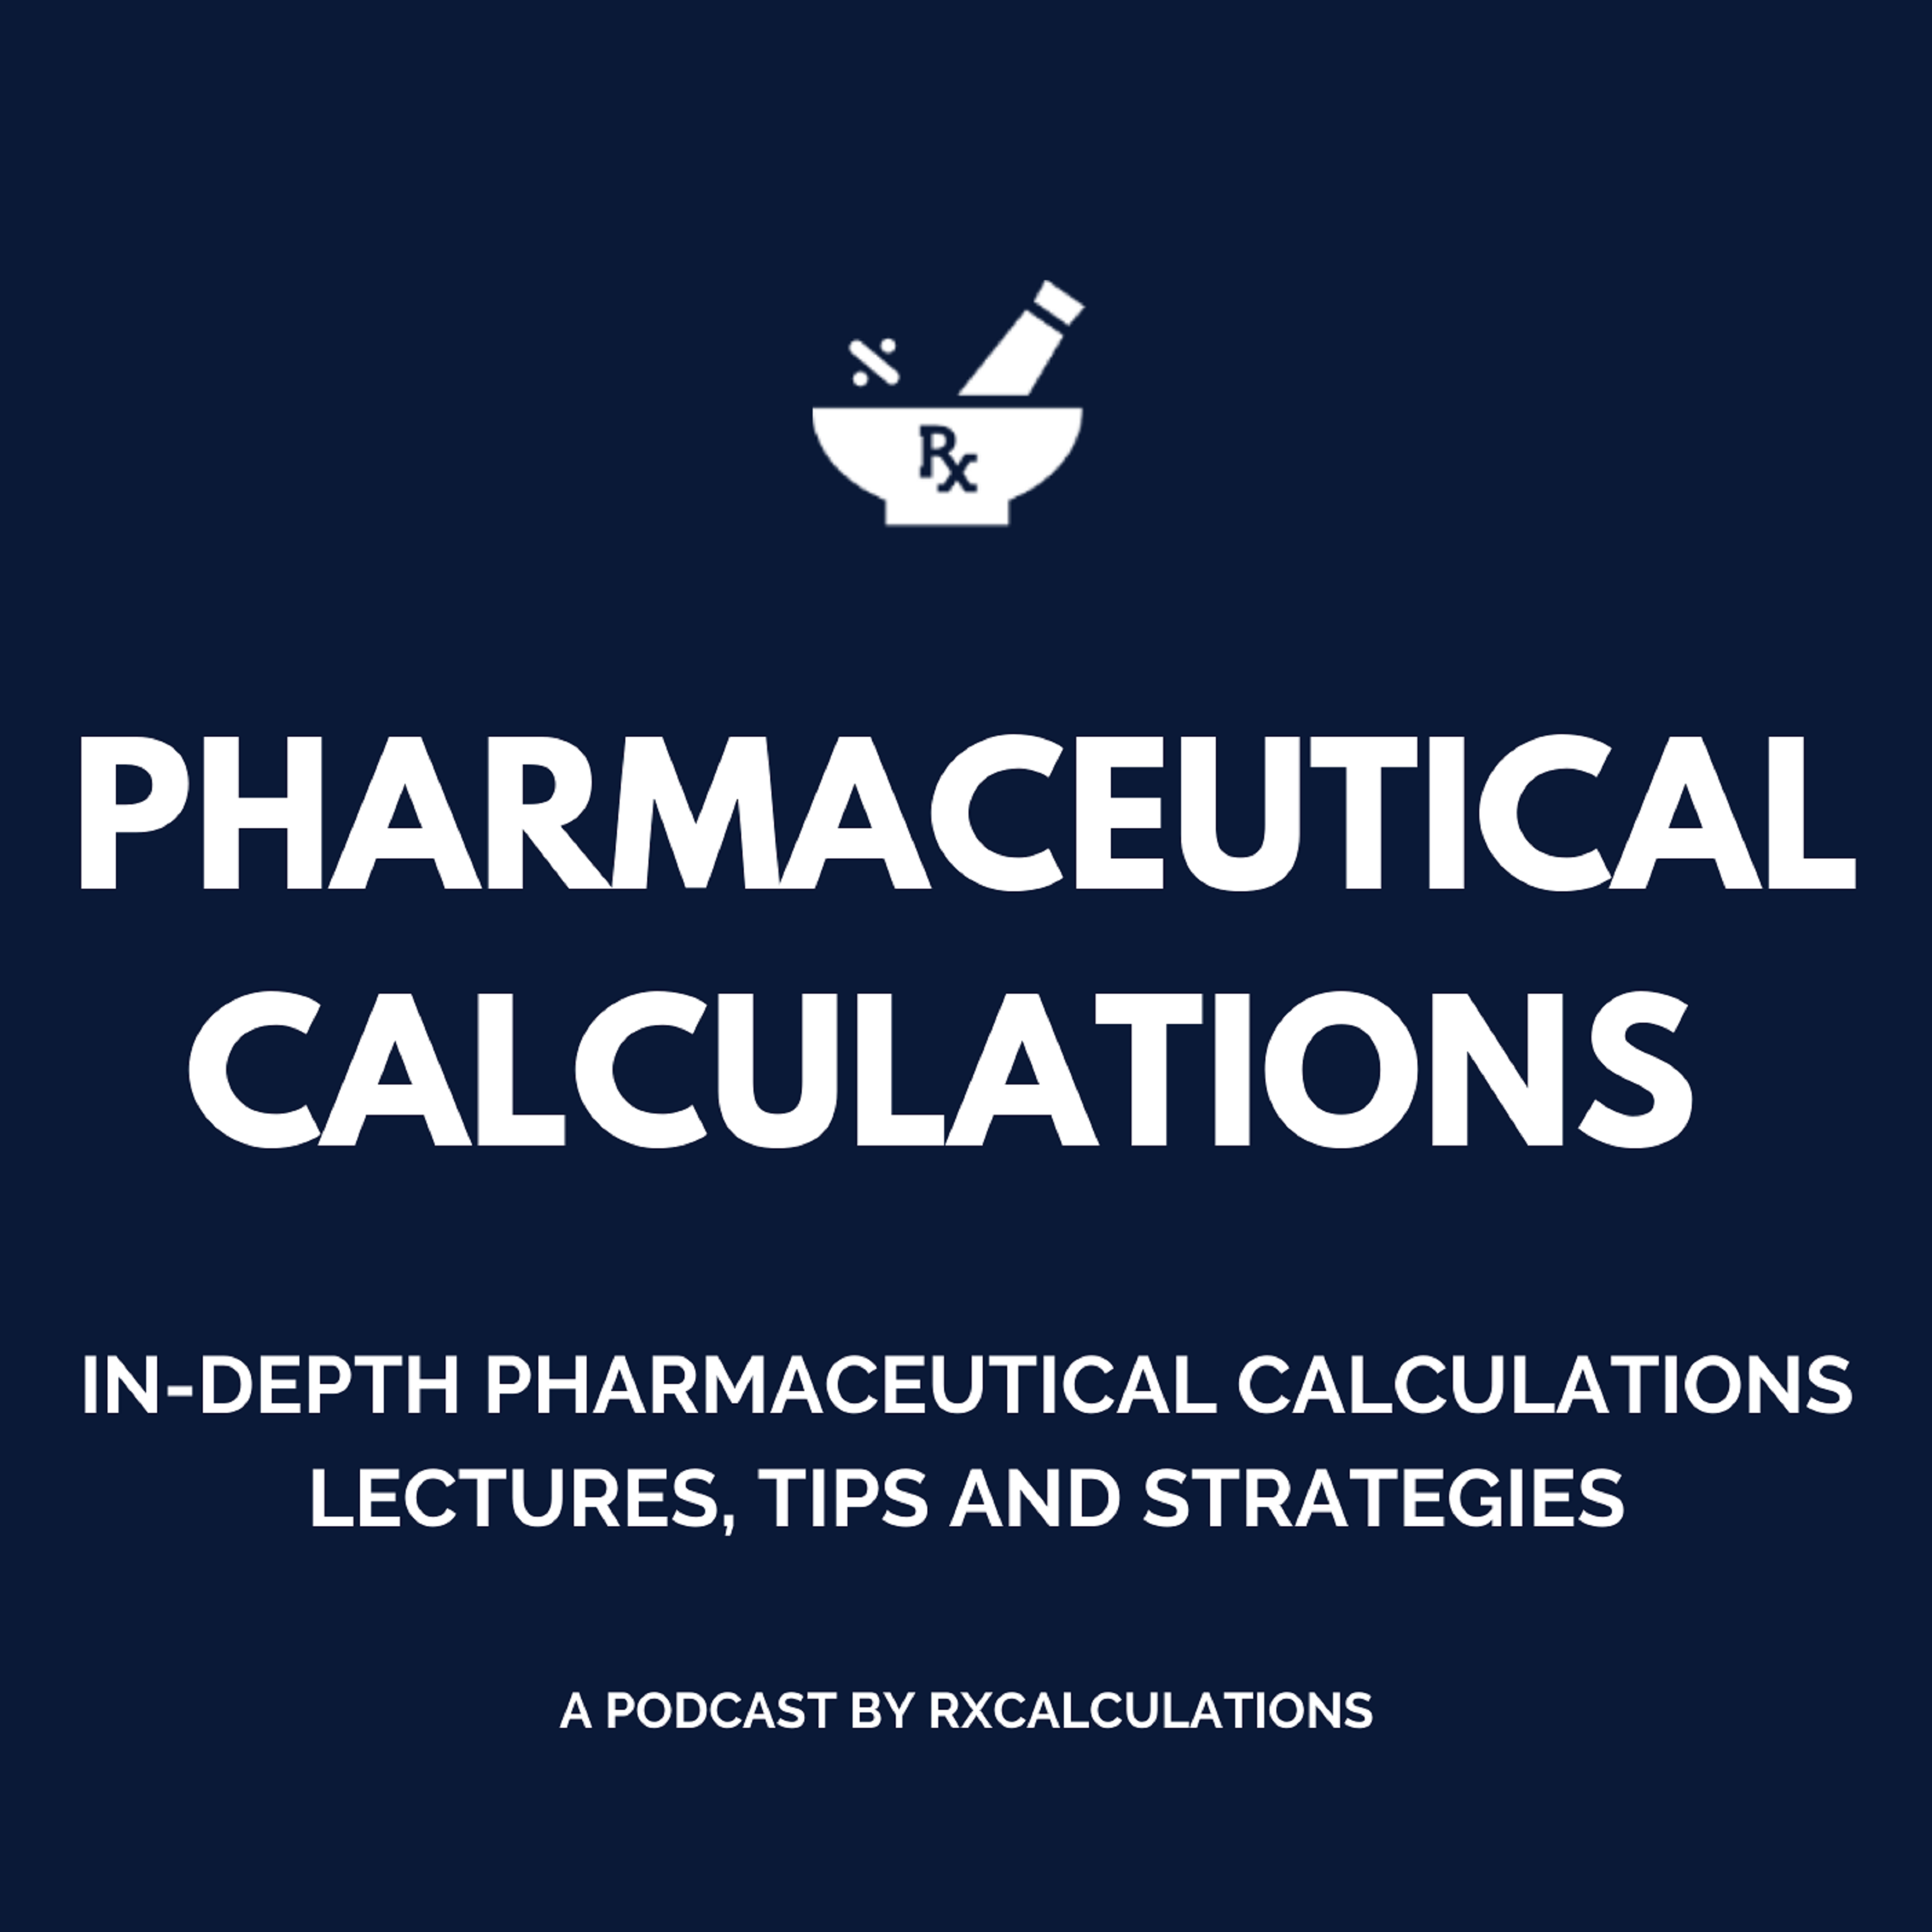 Artwork for podcast Pharmaceutical Calculations